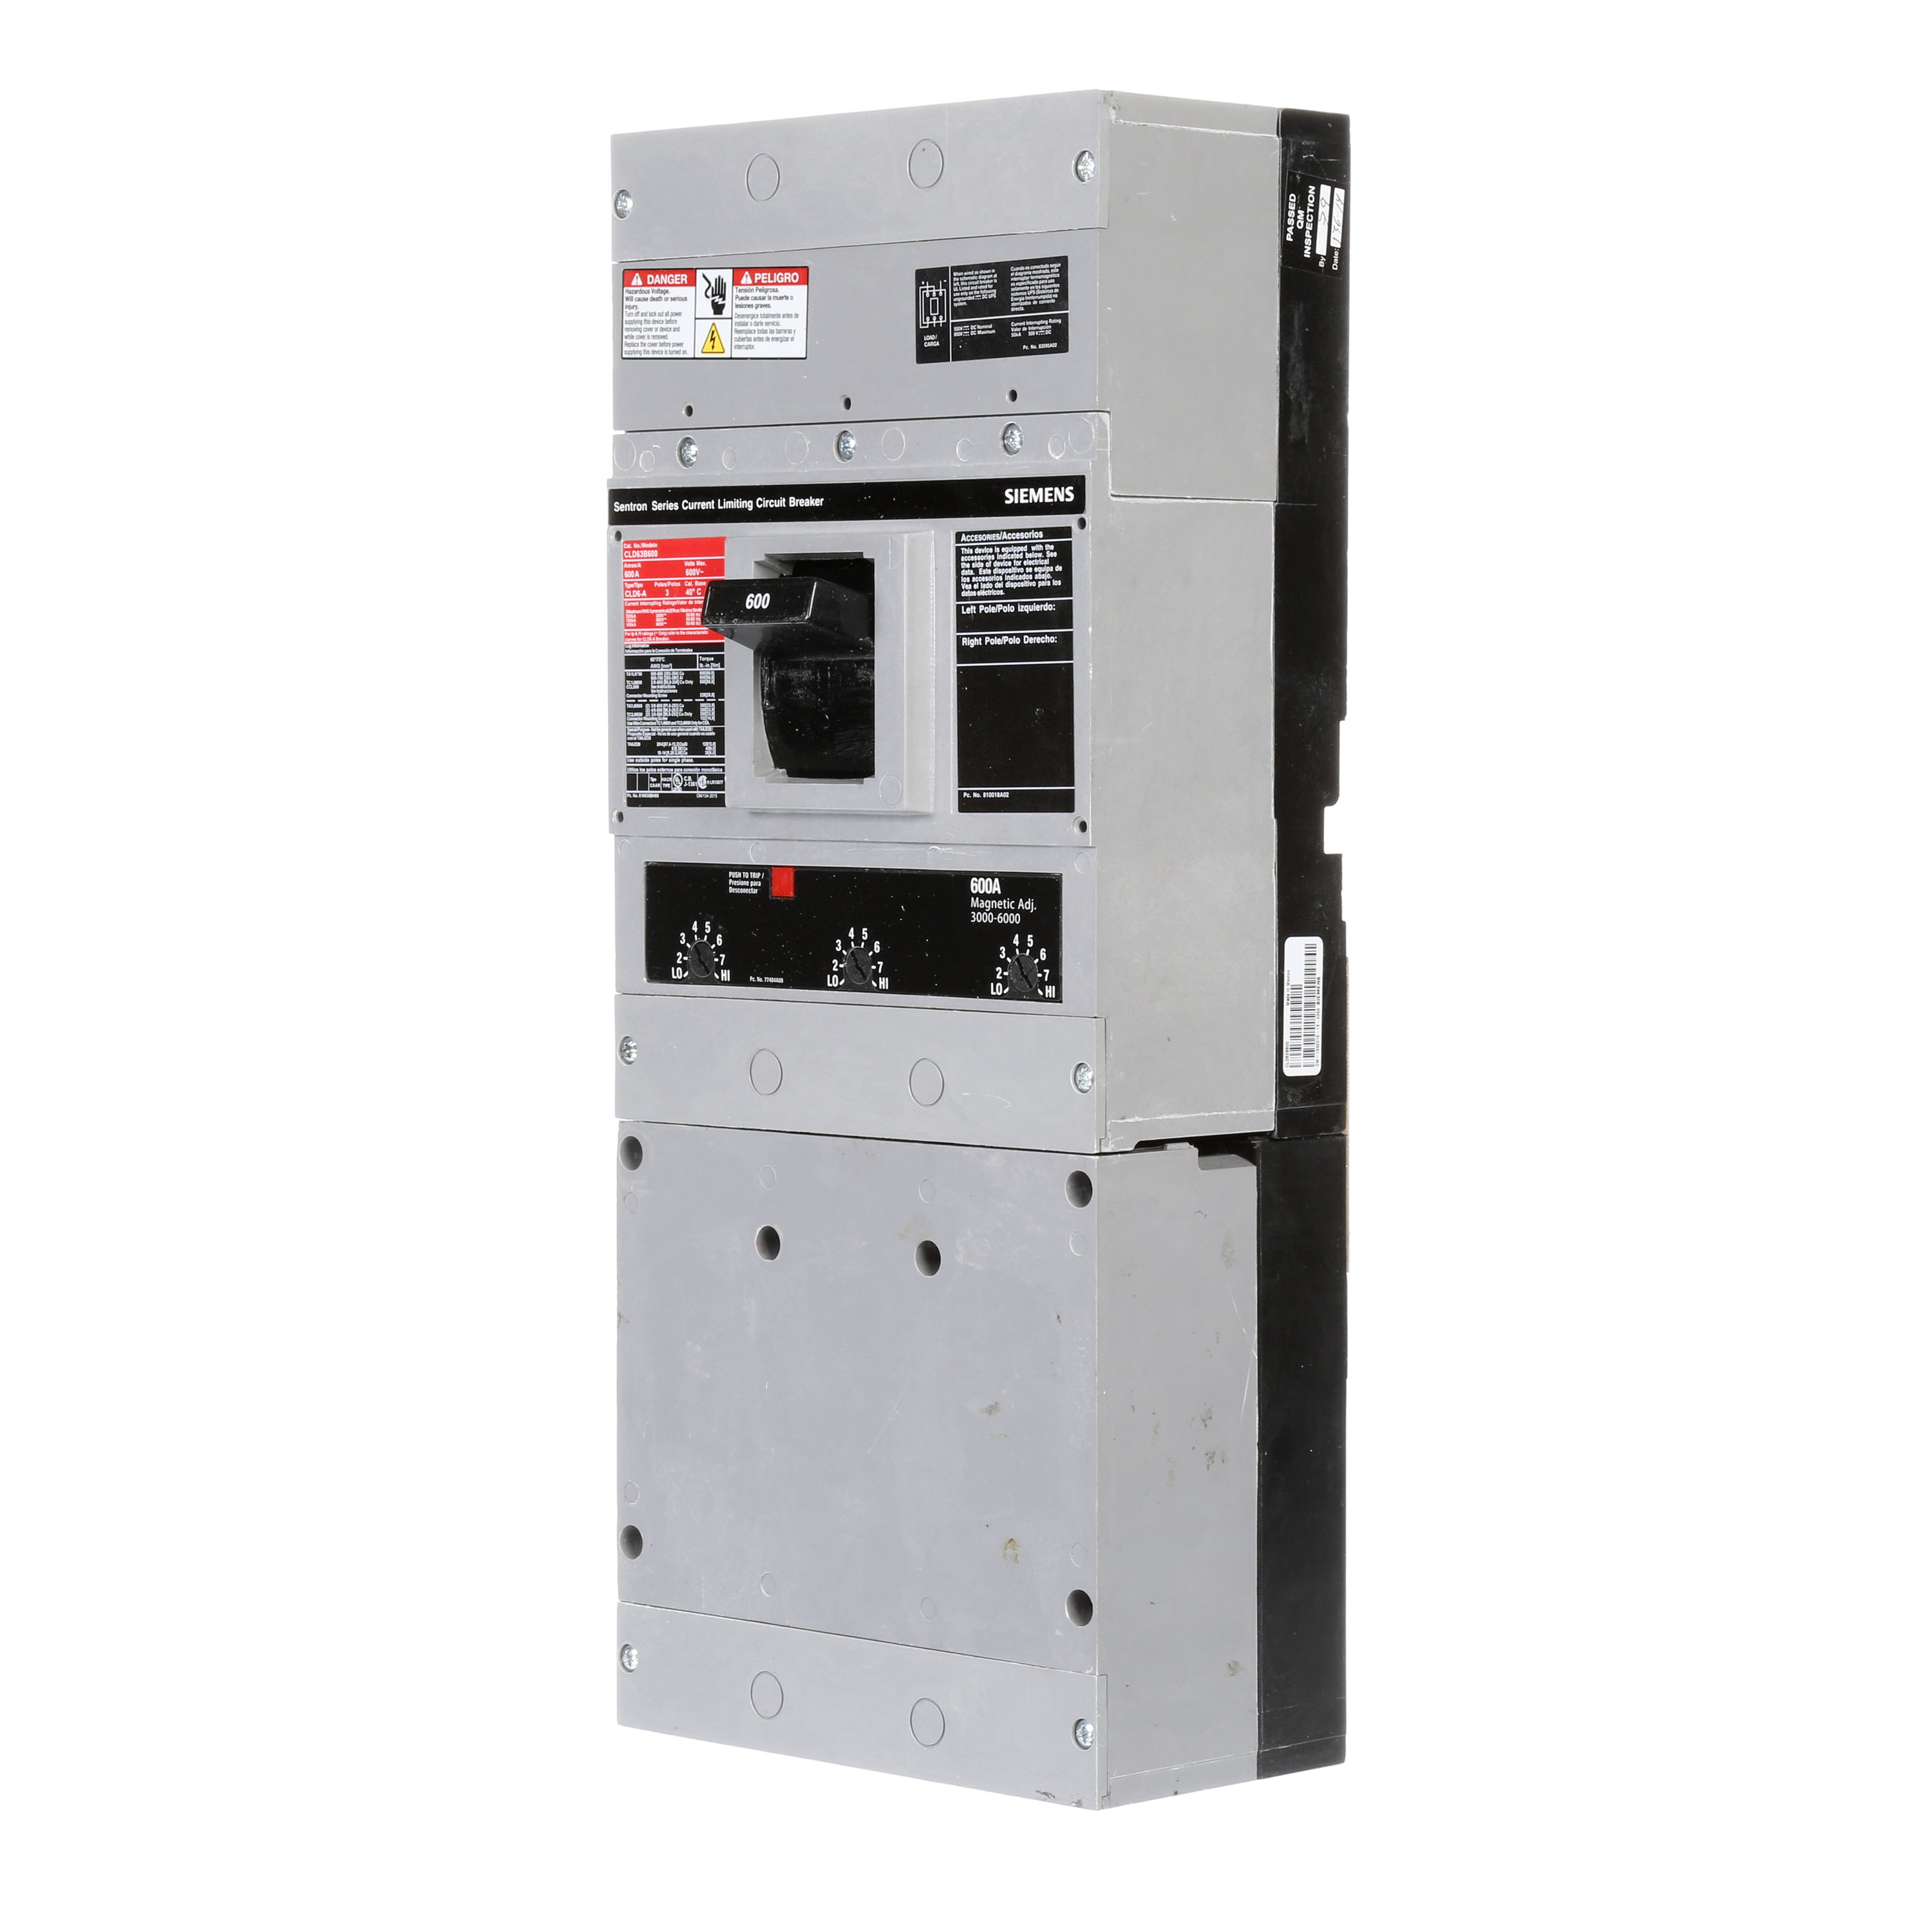 SIEMENS LOW VOLTAGE SENTRON MOLDED CASE CIRCUIT BREAKER WITH THERMAL - MAGNETICTRIP UNIT. ASSEMBLED STANDARD 40 DEG C BREAKER LD FRAME WITH FUSELESS CURRENT LIMITING BREAKING CAPACITY. 600A 3-POLE (100KAIC AT 600V) (150KAIC AT 480V). NON-INTERCHANGEABLE TRIP UNIT. SPECIAL FEATURES NO LUGS INSTALLED. DIMENSIONS (W x Hx D) IN 7.50 x 17.9 x 4.00.